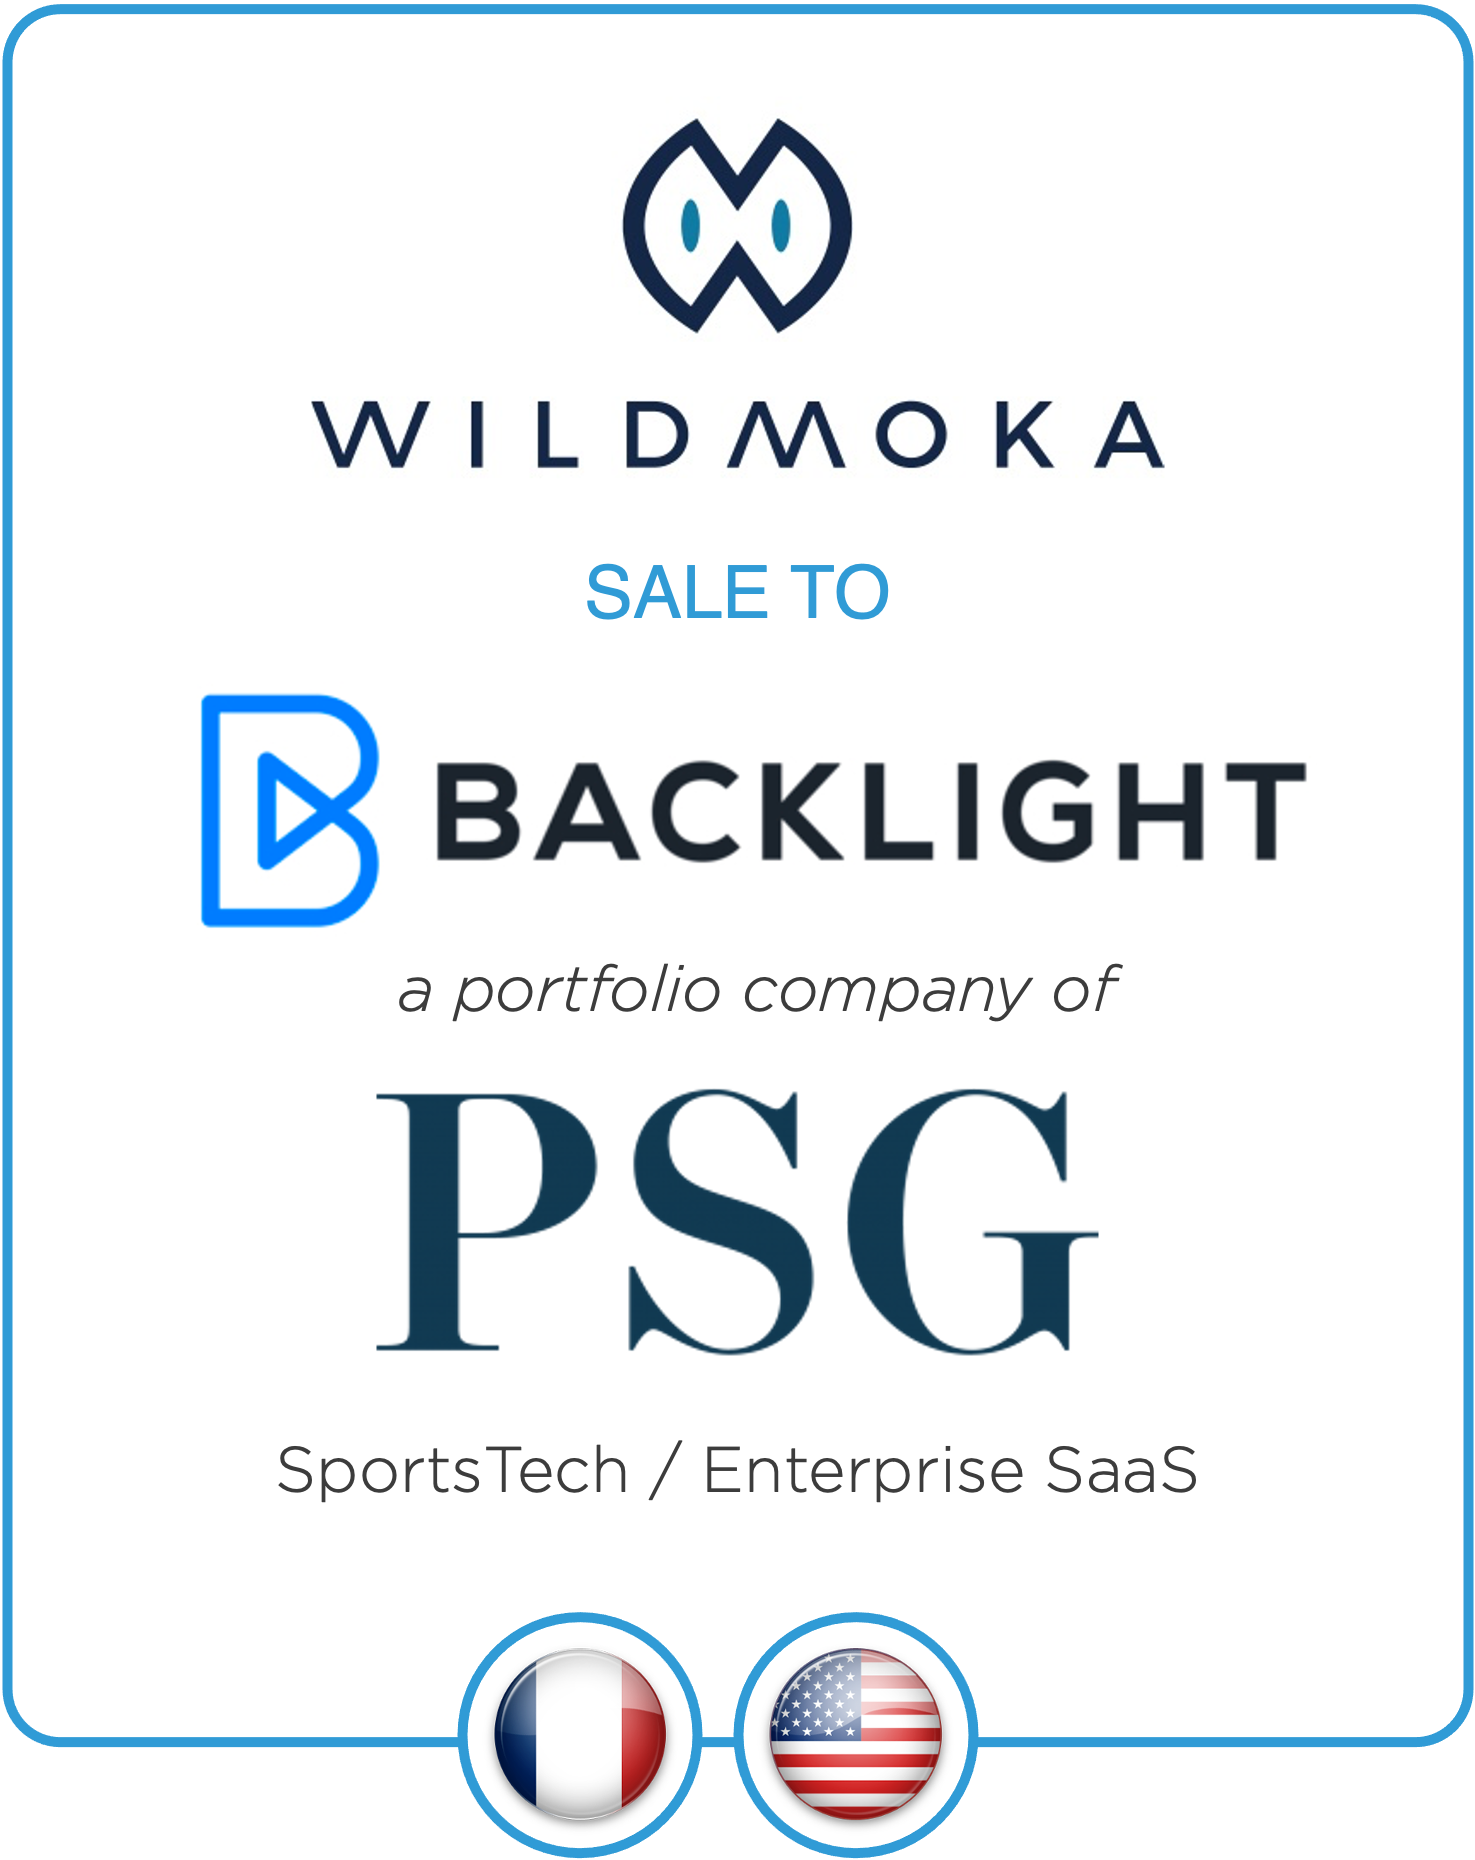 Drake Star Acts as Exclusive Financial Advisor to Wildmoka on its Sale to Backlight, a New Media Tech Company